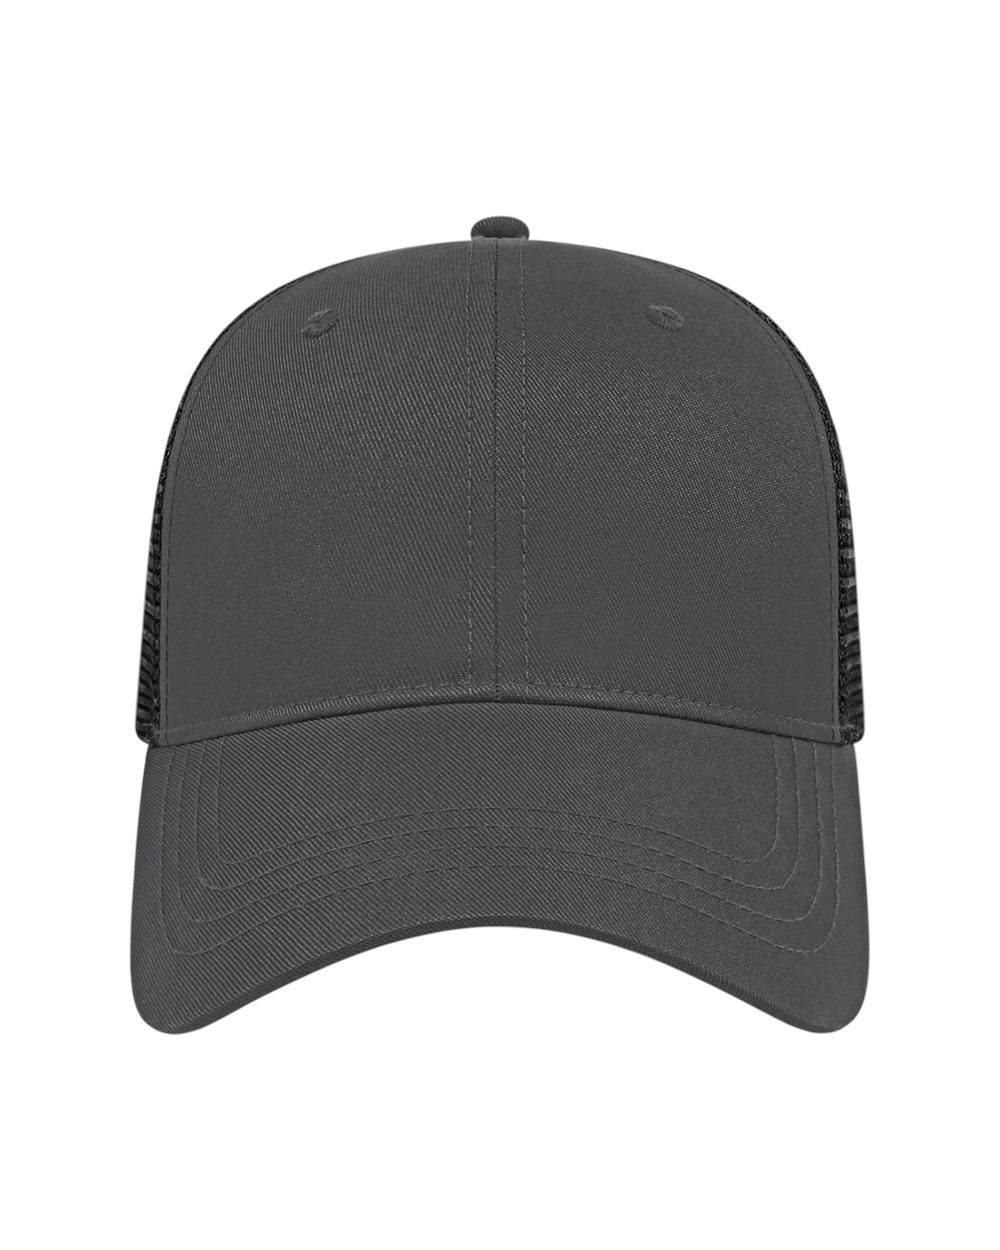 Image for X-tra Value Polyester Trucker Cap - x800